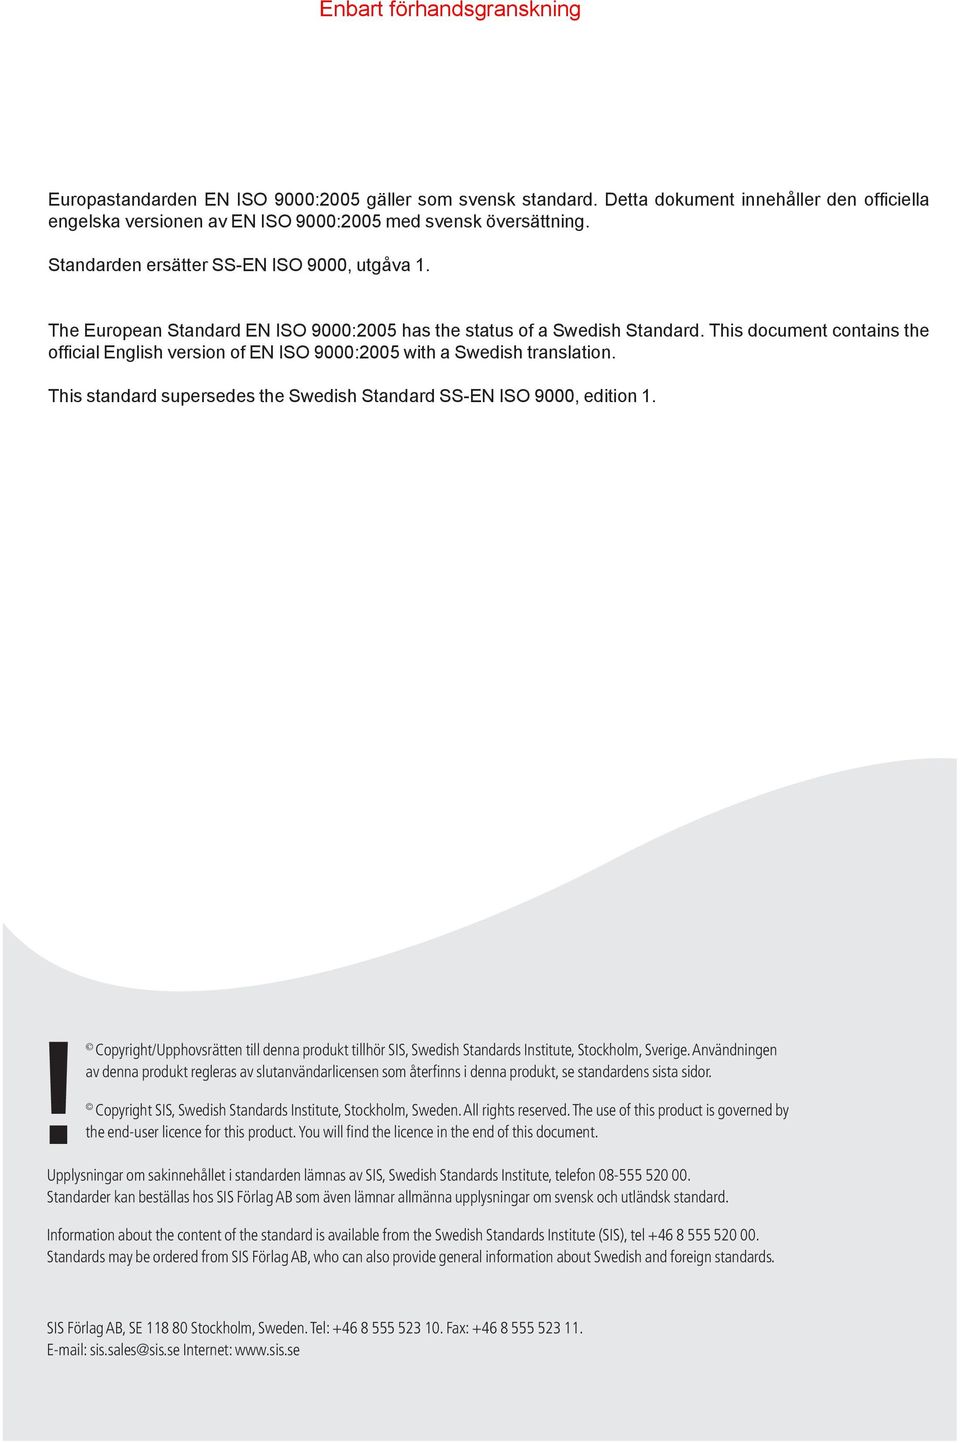 This document contains the official English version of EN ISO 9000:2005 with a Swedish translation. This standard supersedes the Swedish Standard SS-EN ISO 9000, edition 1.